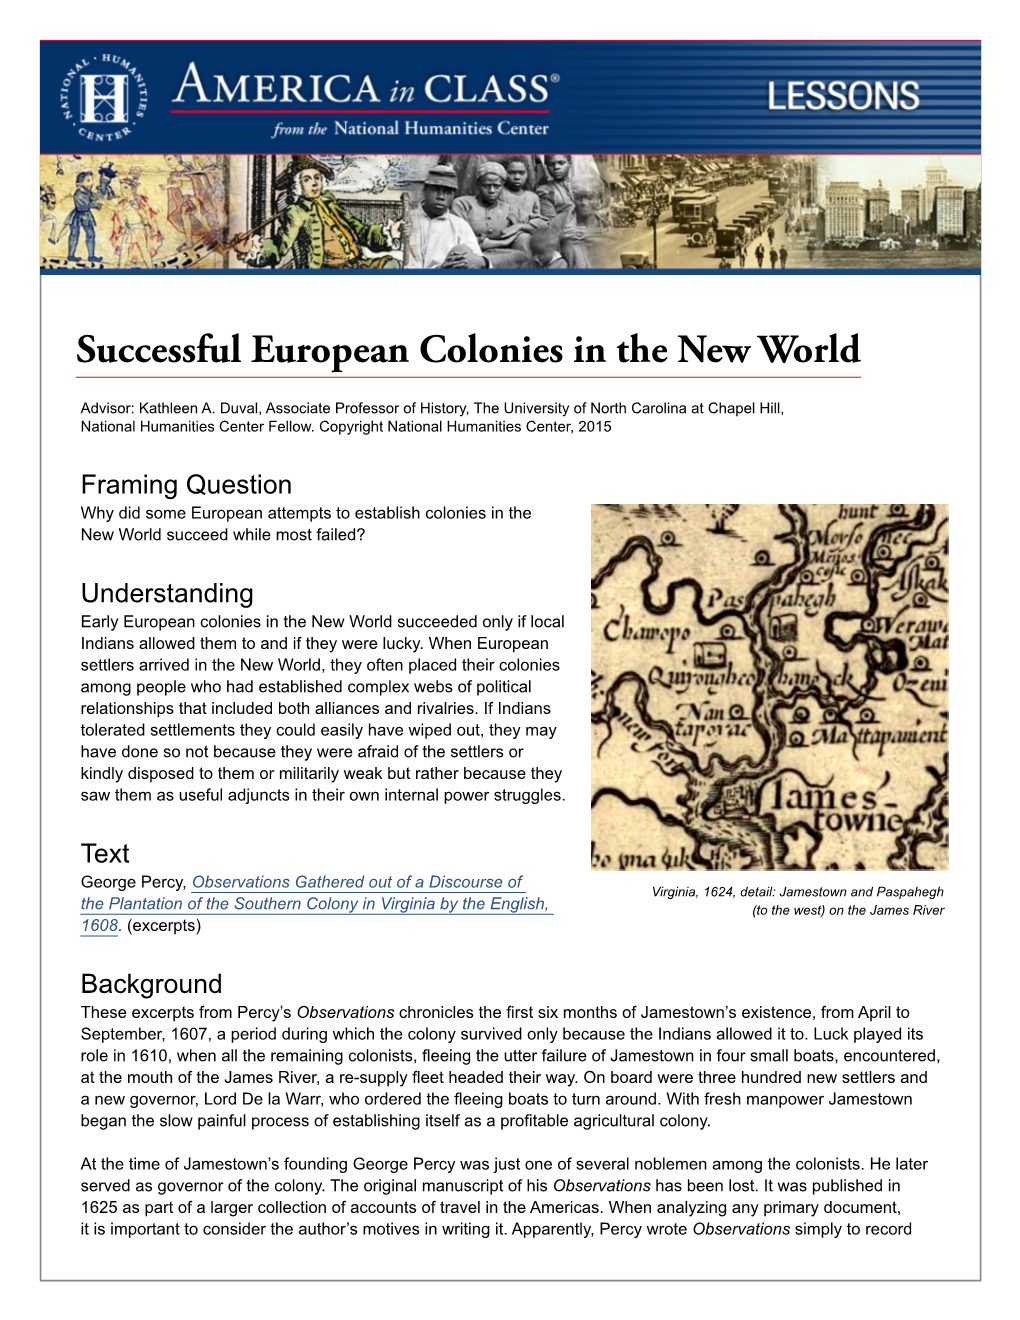 Successful European Colonies in the New World